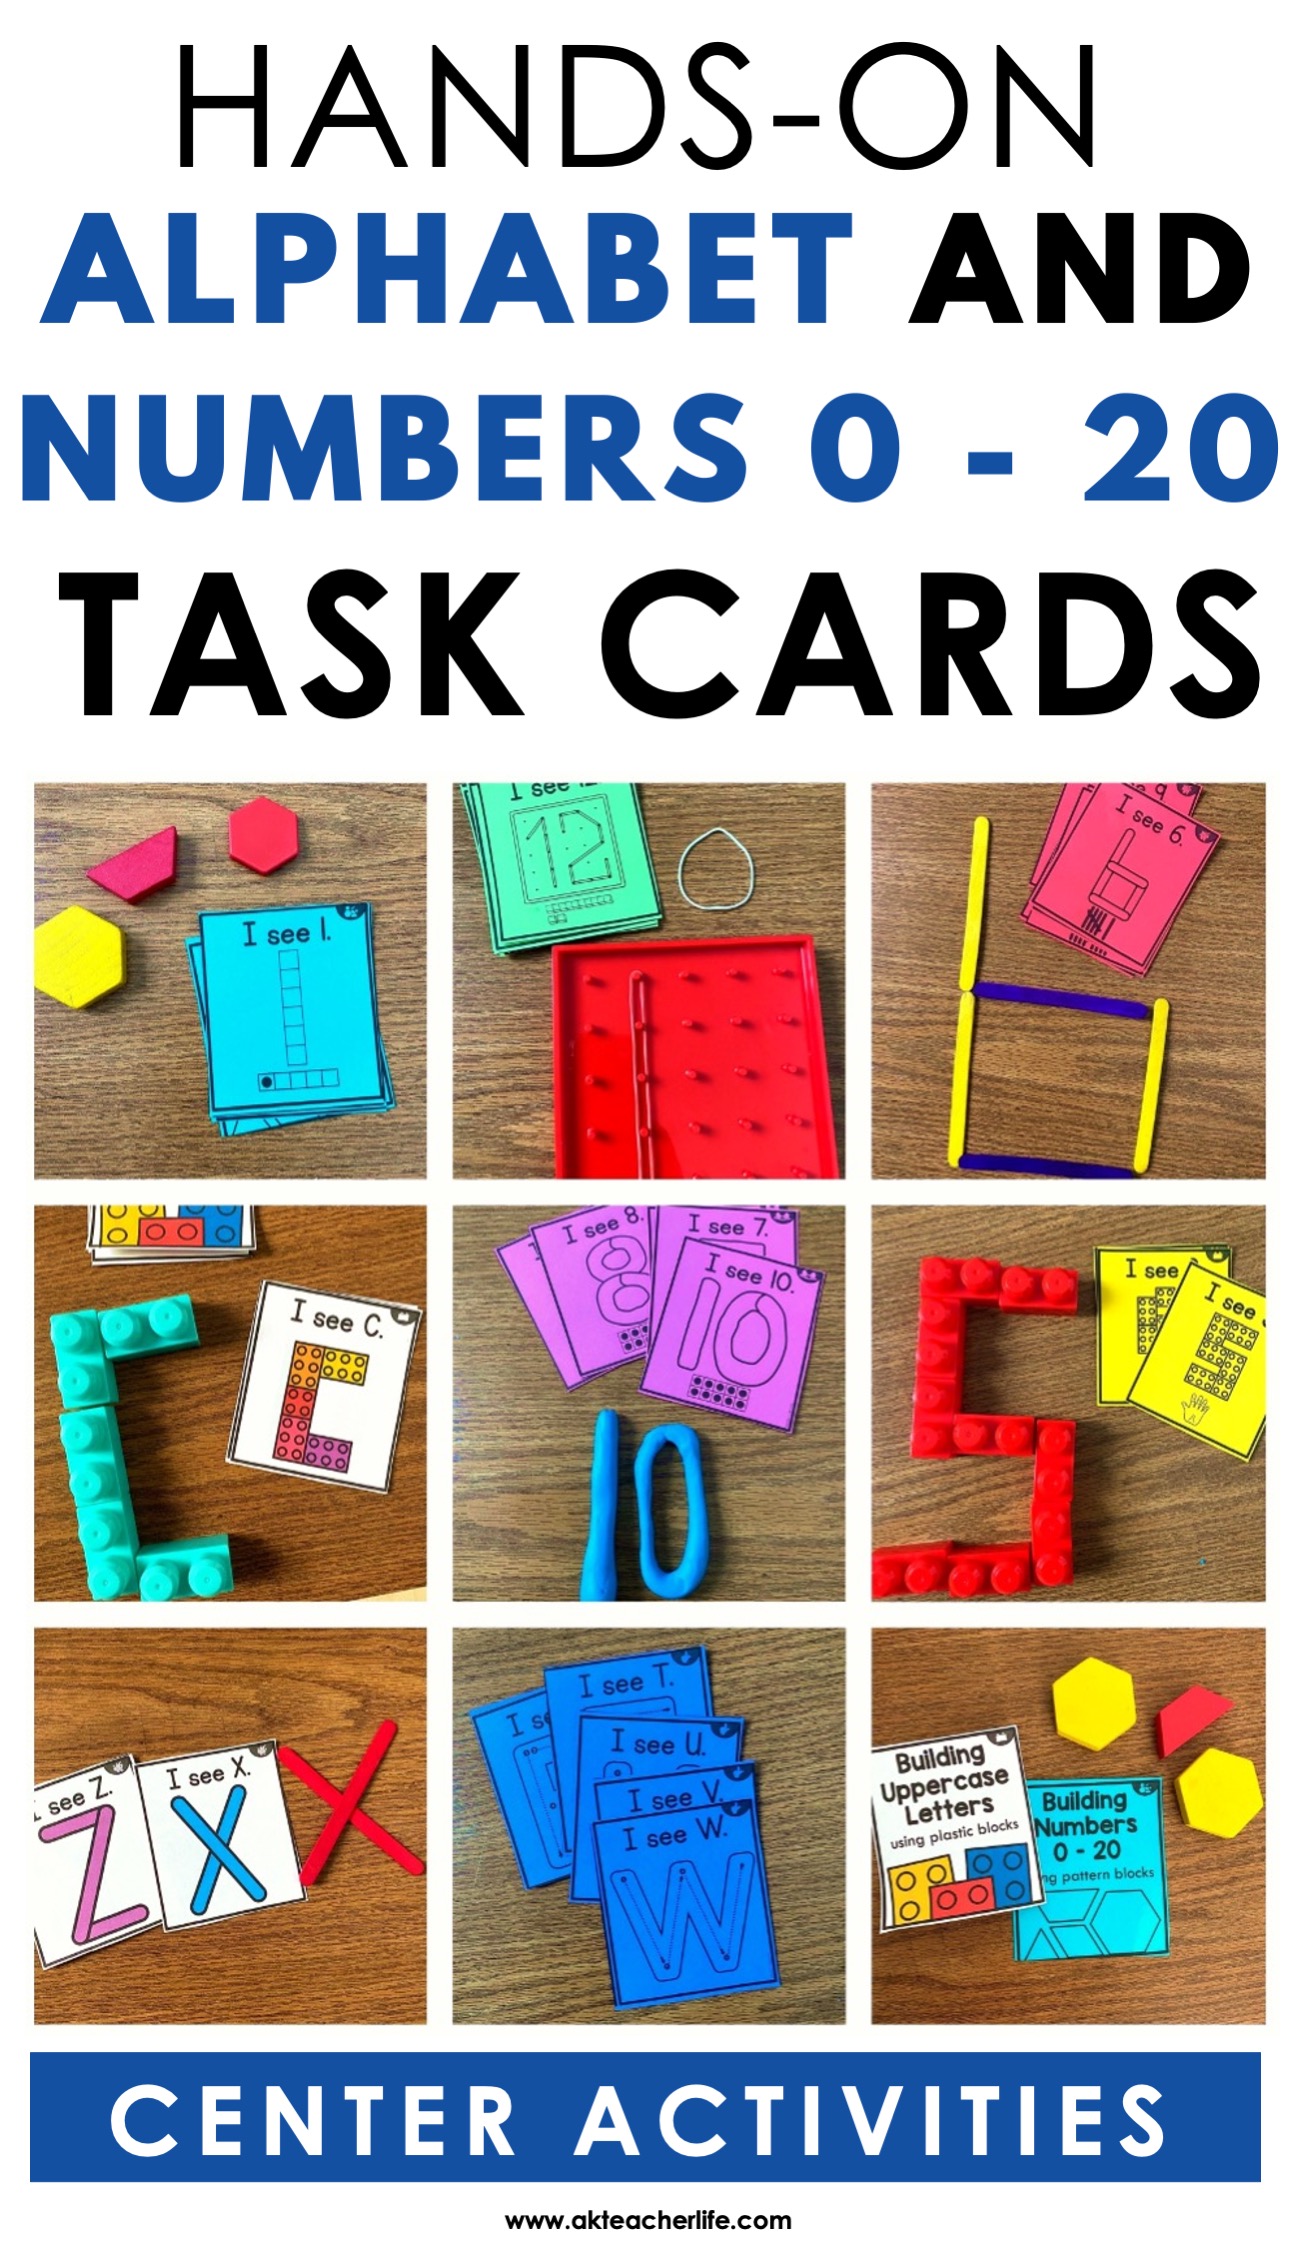 Hands-on alphabet and numbers task cards for literacy and math centers